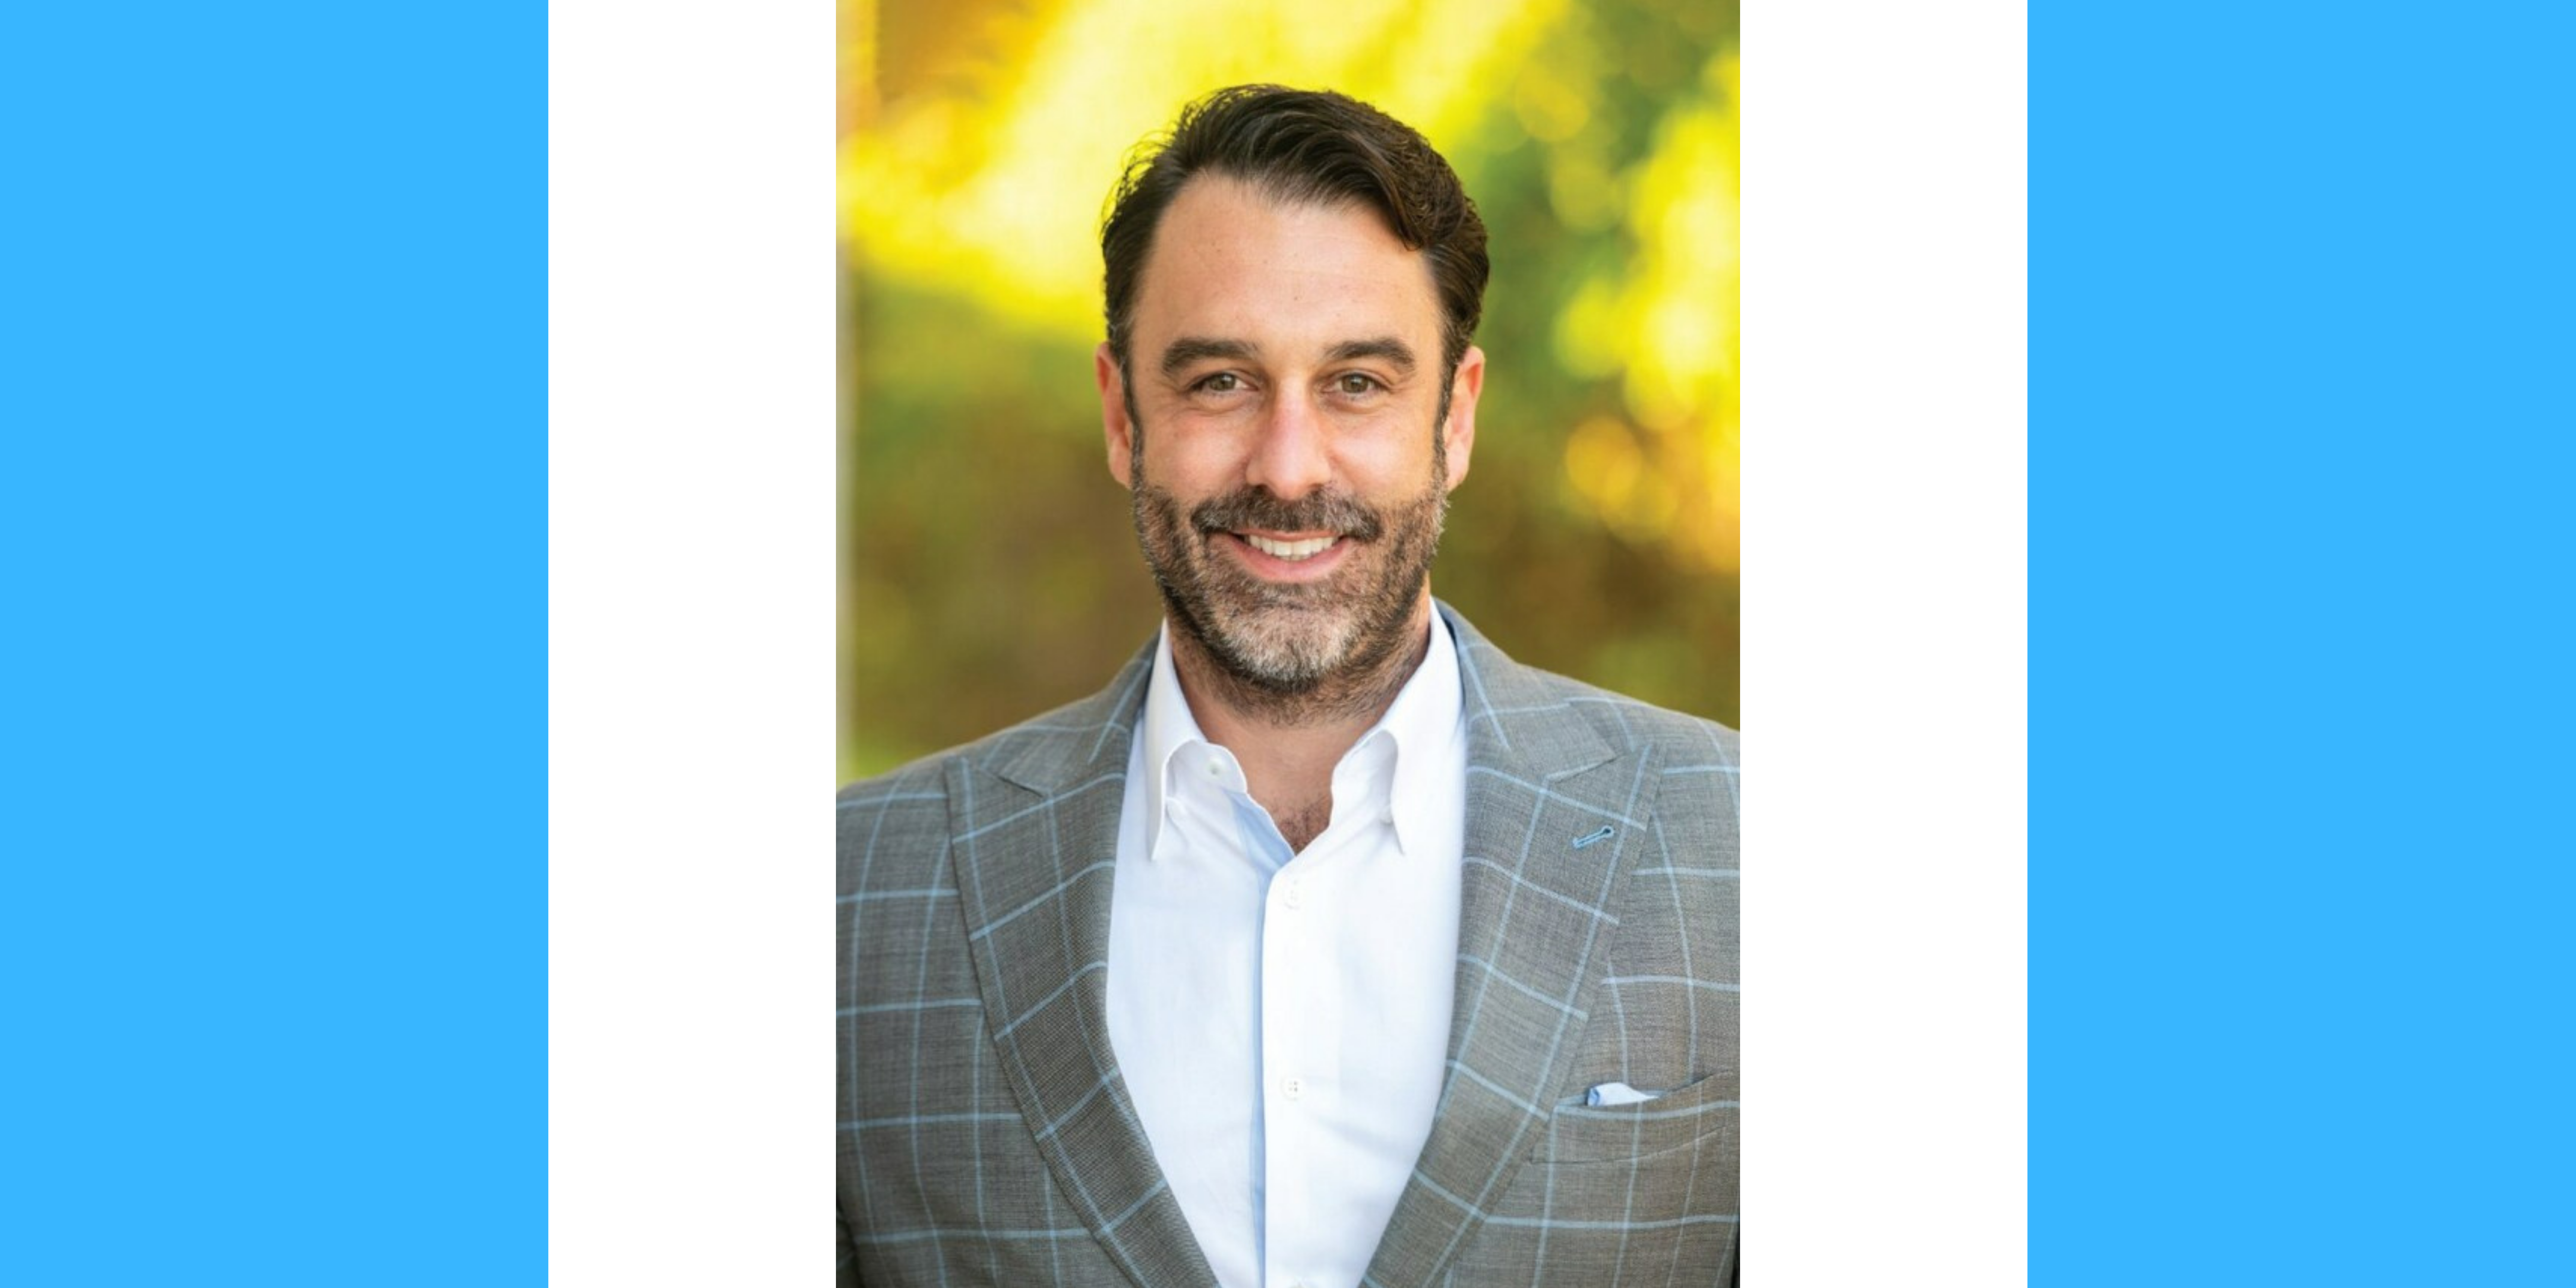 First Home Mortgage Appoints Matt Nader To SVP, Director Of Sales